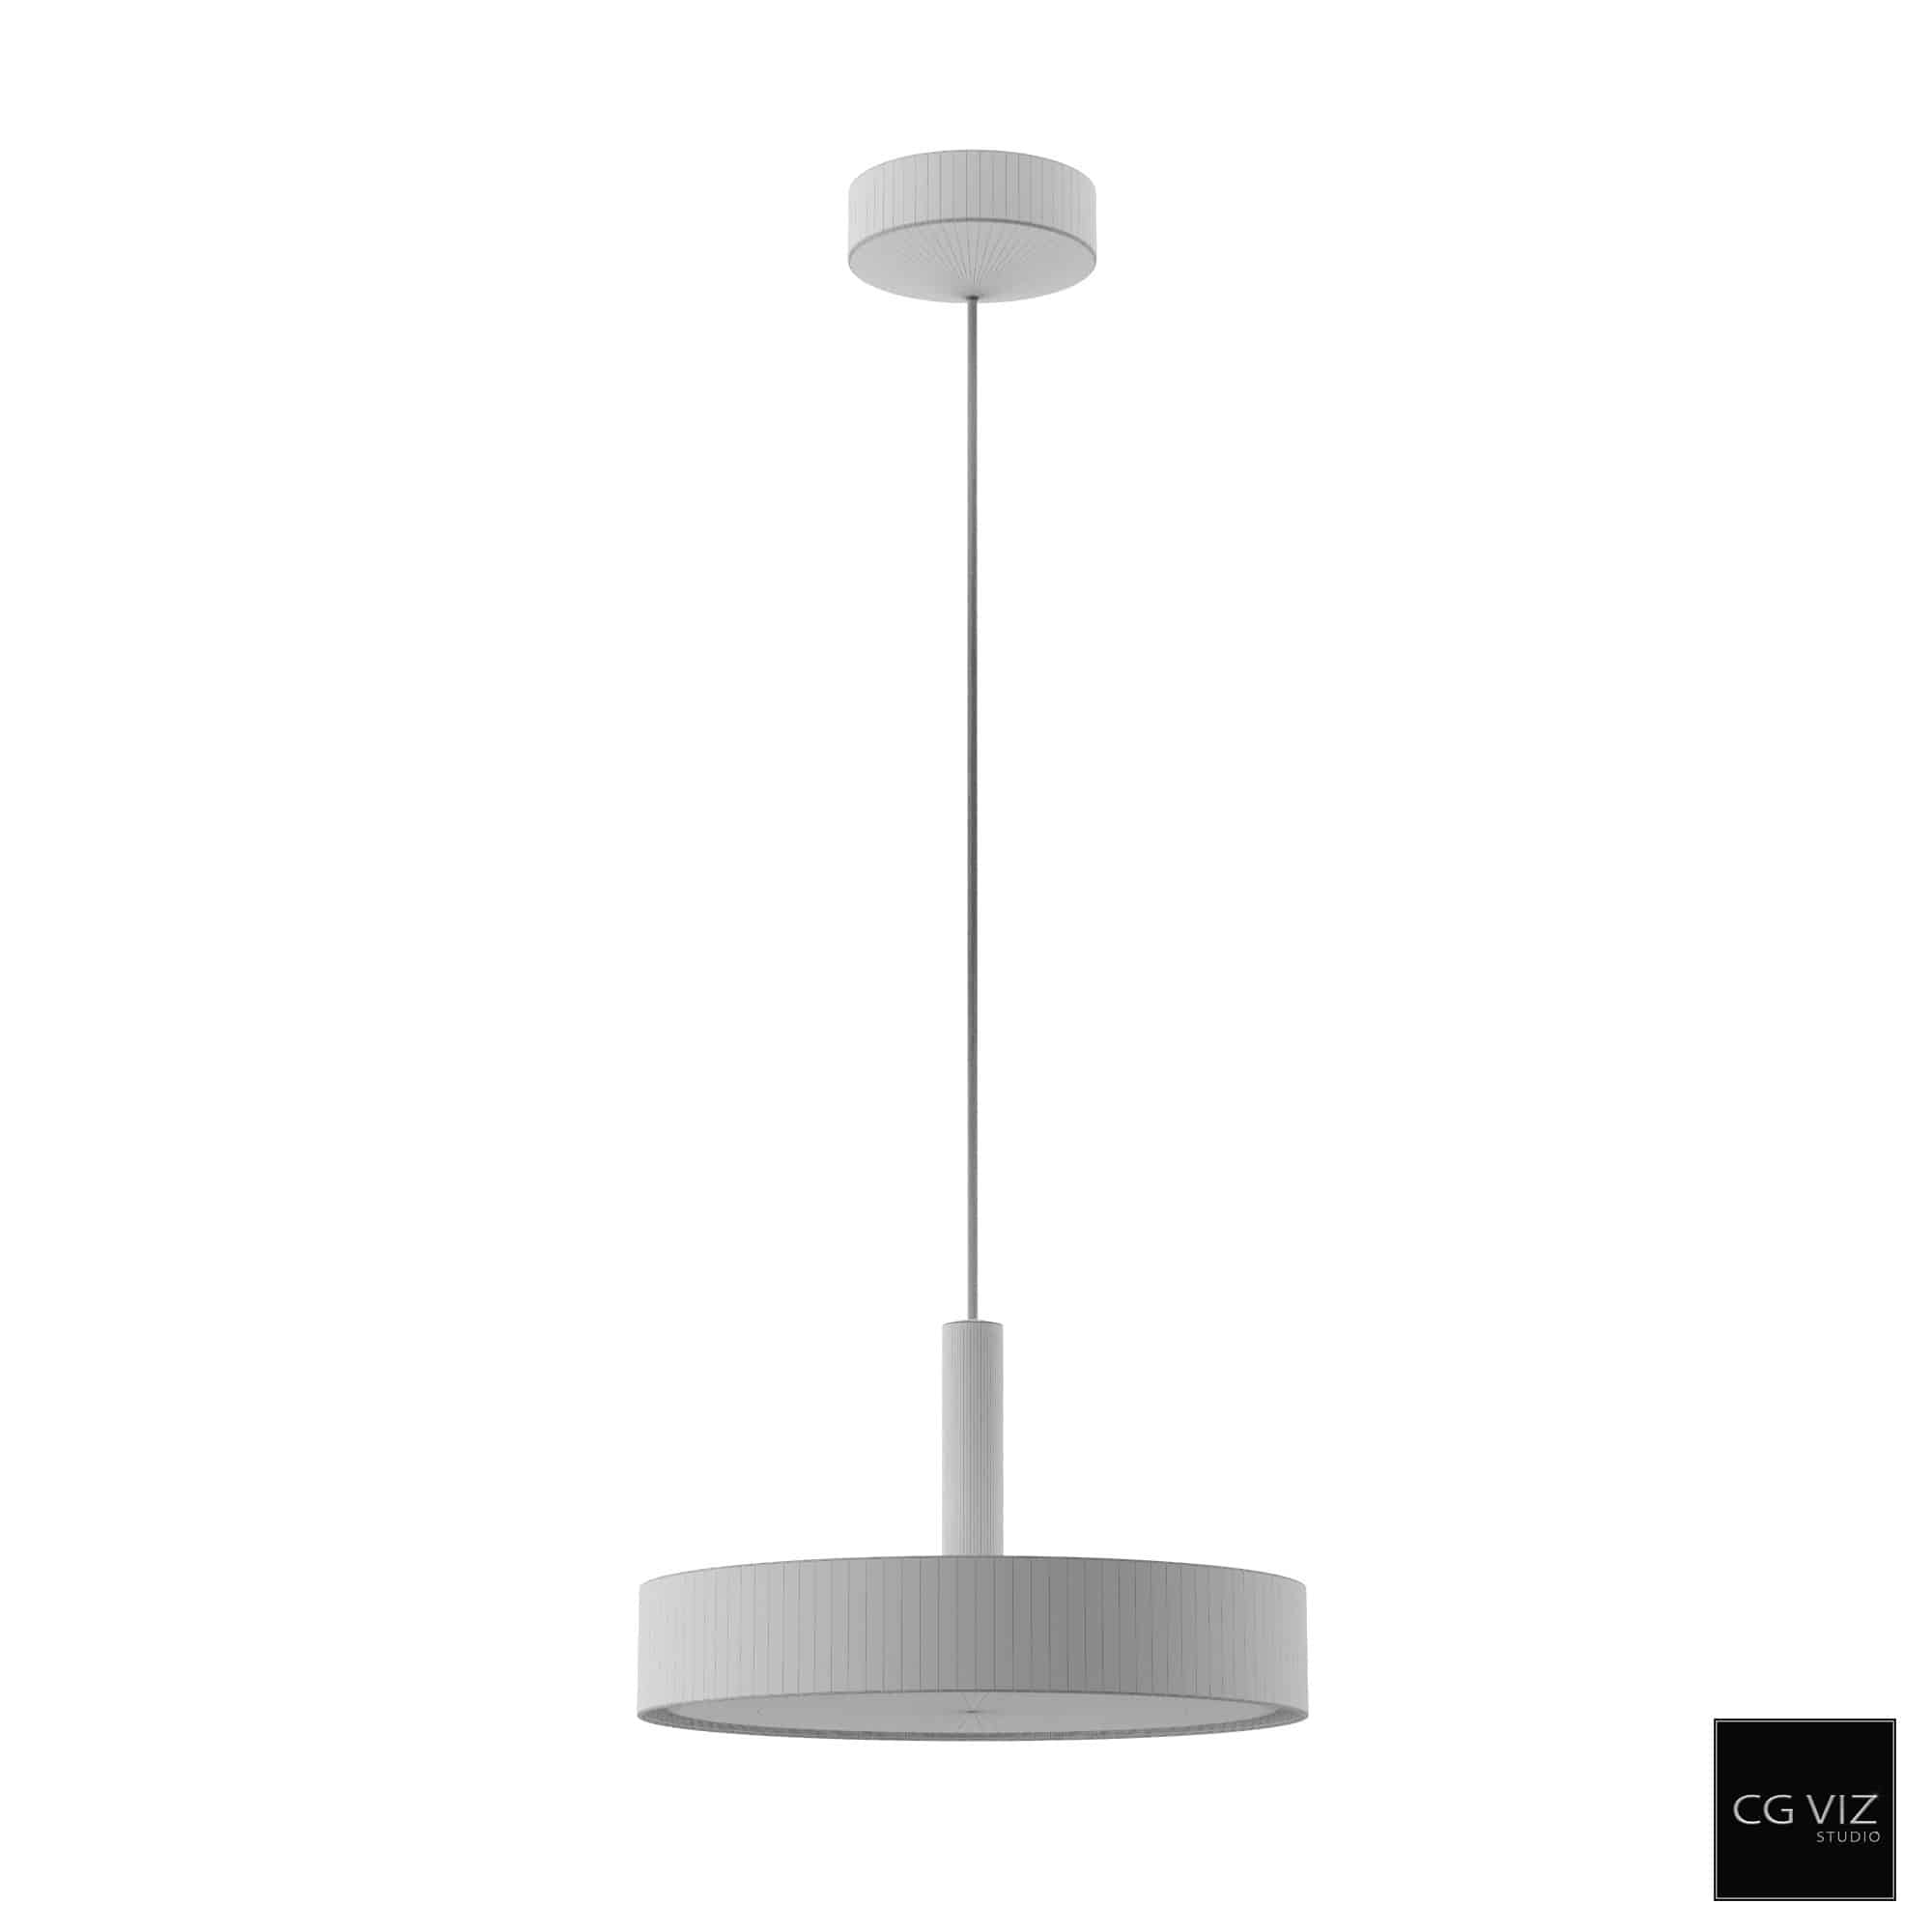 Wireframe View of LP Slim Round Suspended Pendant Lamp 3D Model